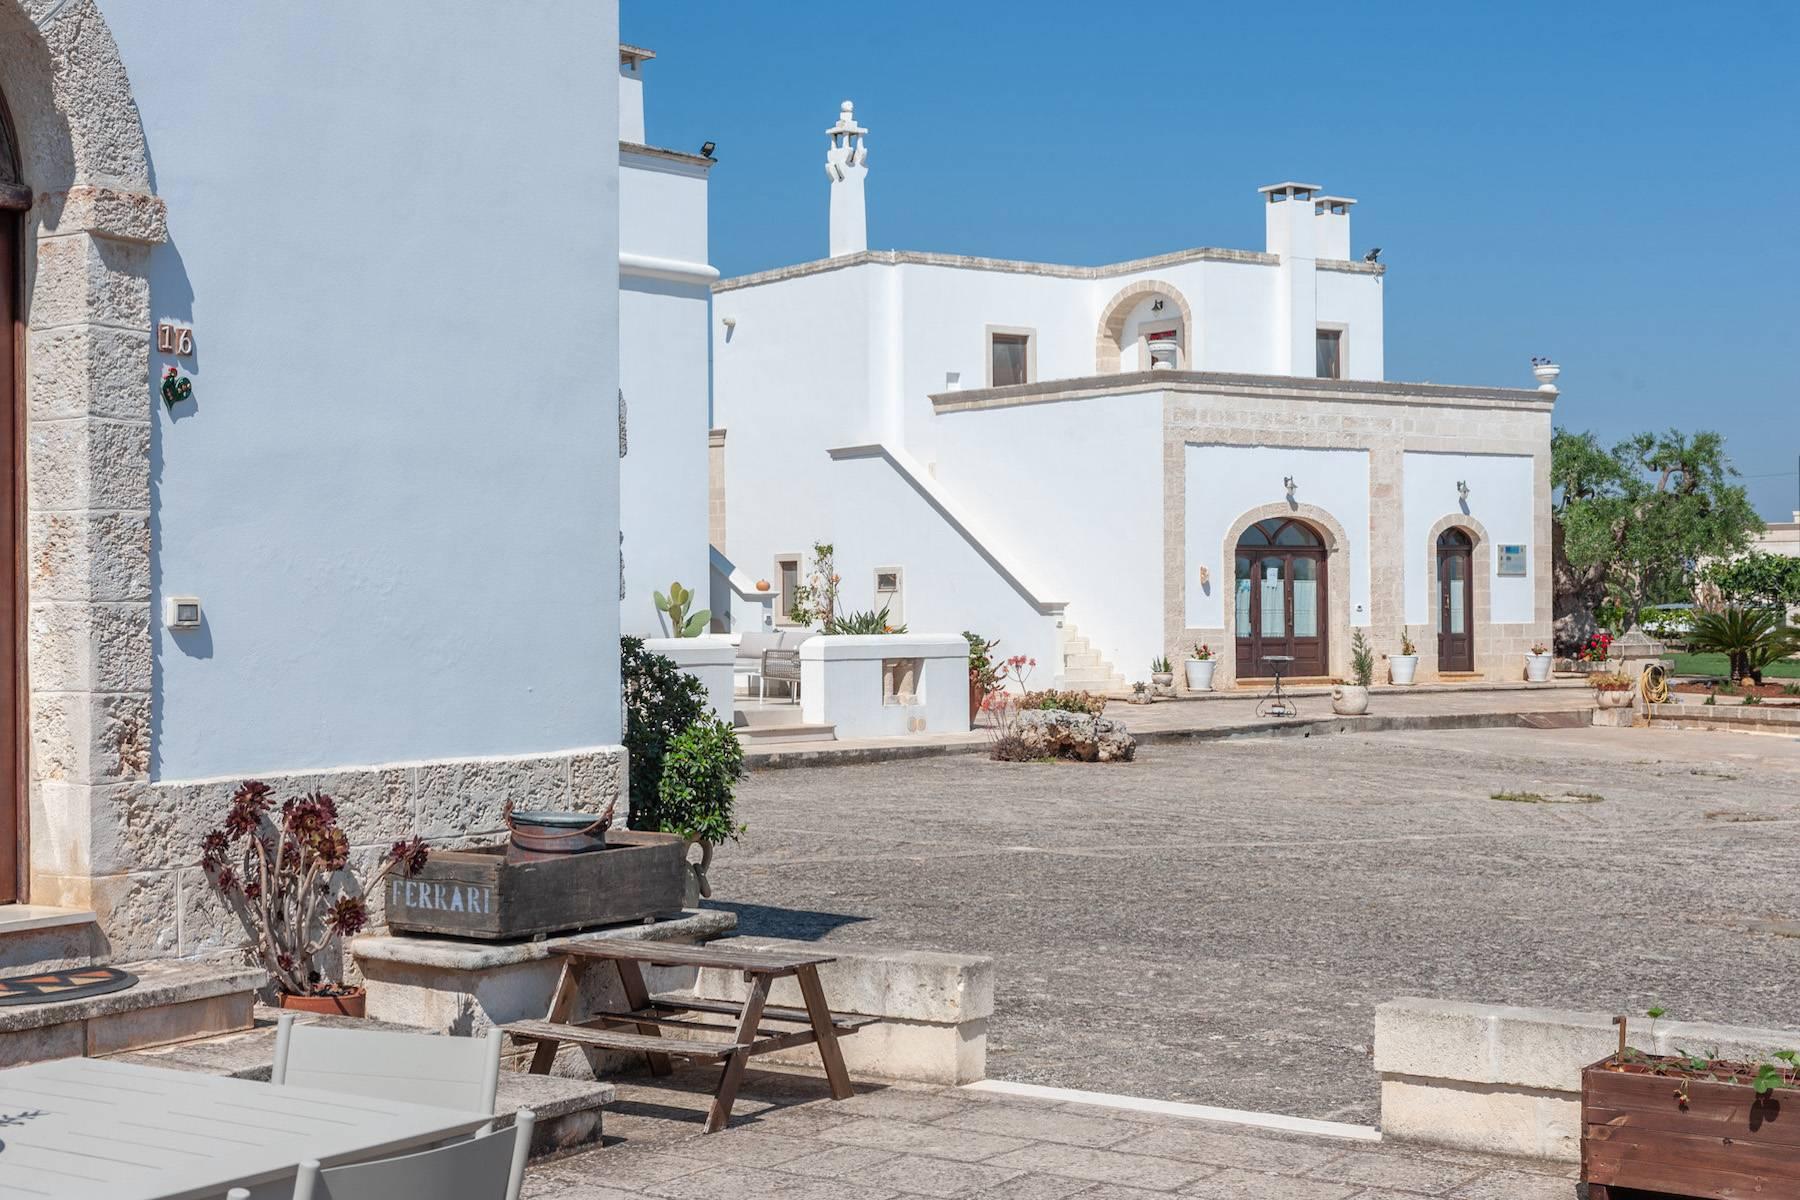 Charming 18th century Masseria surrounded by centuries-old olive trees - 3